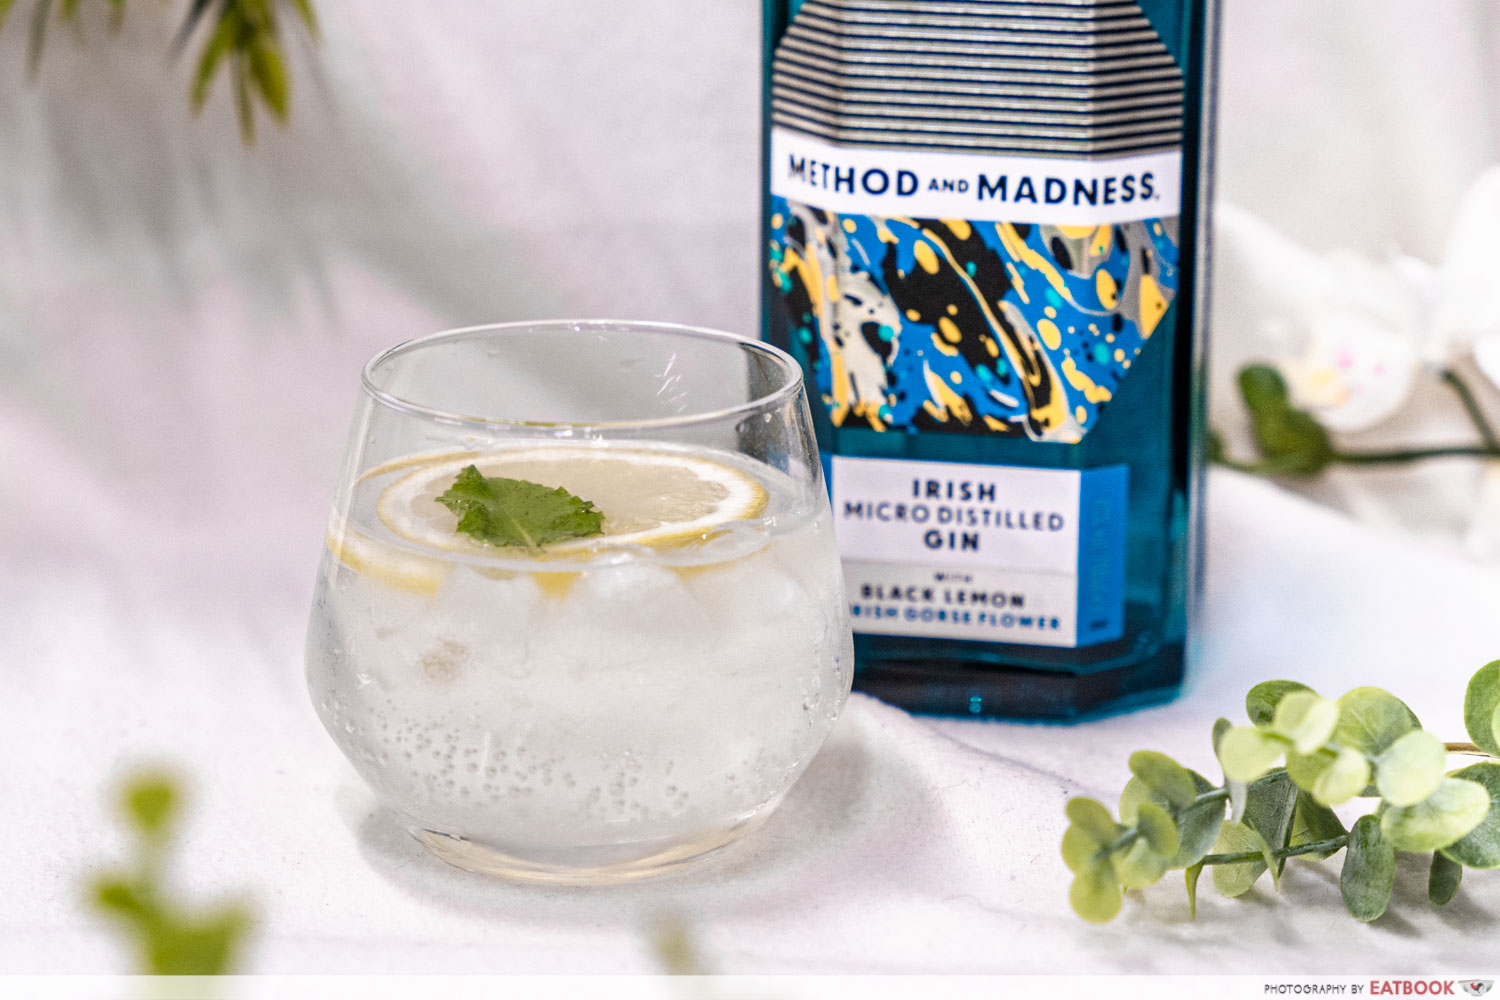 method and madness gin